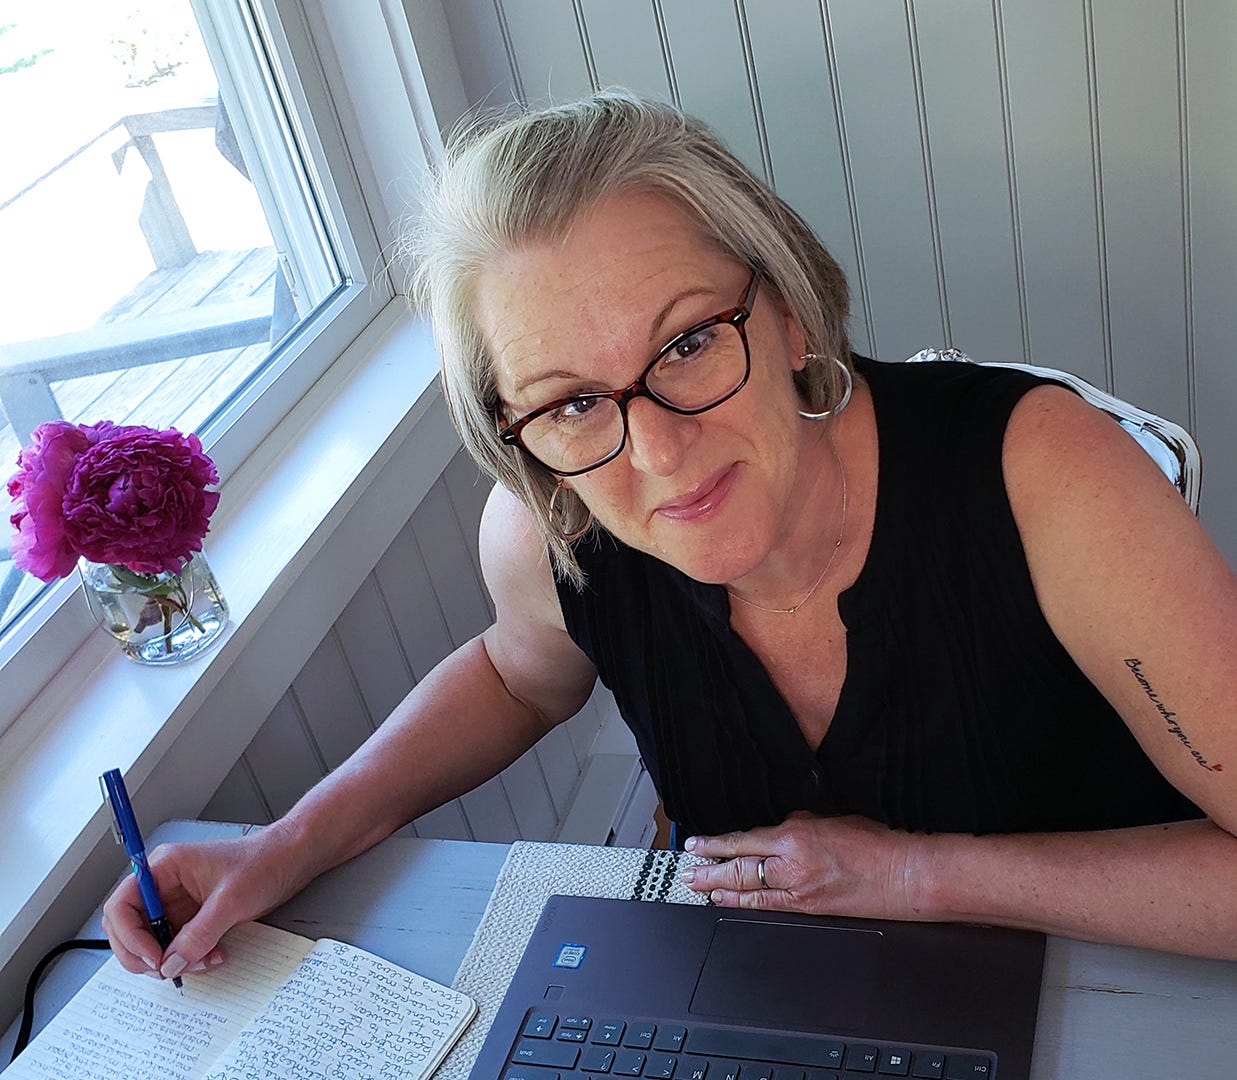 a midlife woman writer reinventing herself and career in Vermont